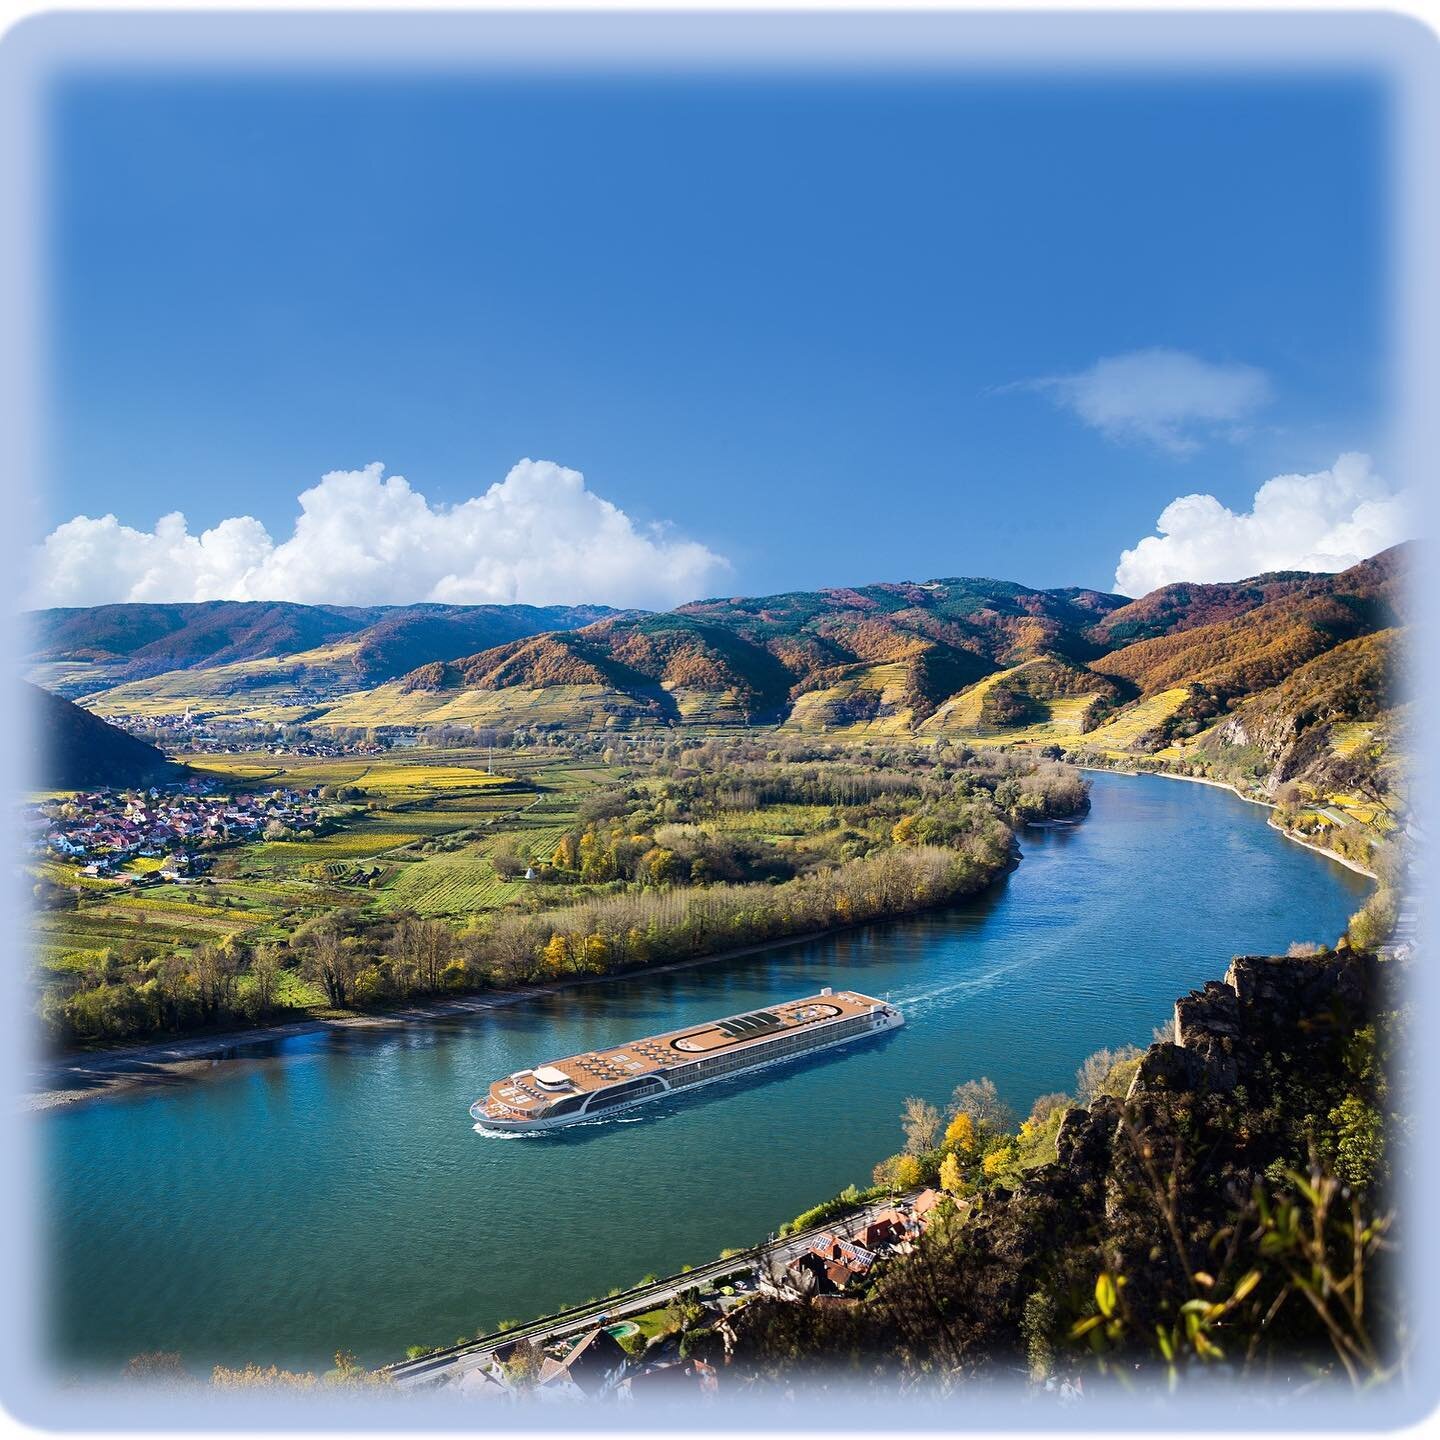 While ocean cruises take you to countries, river cruises take you through them. There simply is no way to reach river cruise destinations on mega cruise ships. Most ships range from 144 to 196 passengers. This means that you&rsquo;ll never have to wa